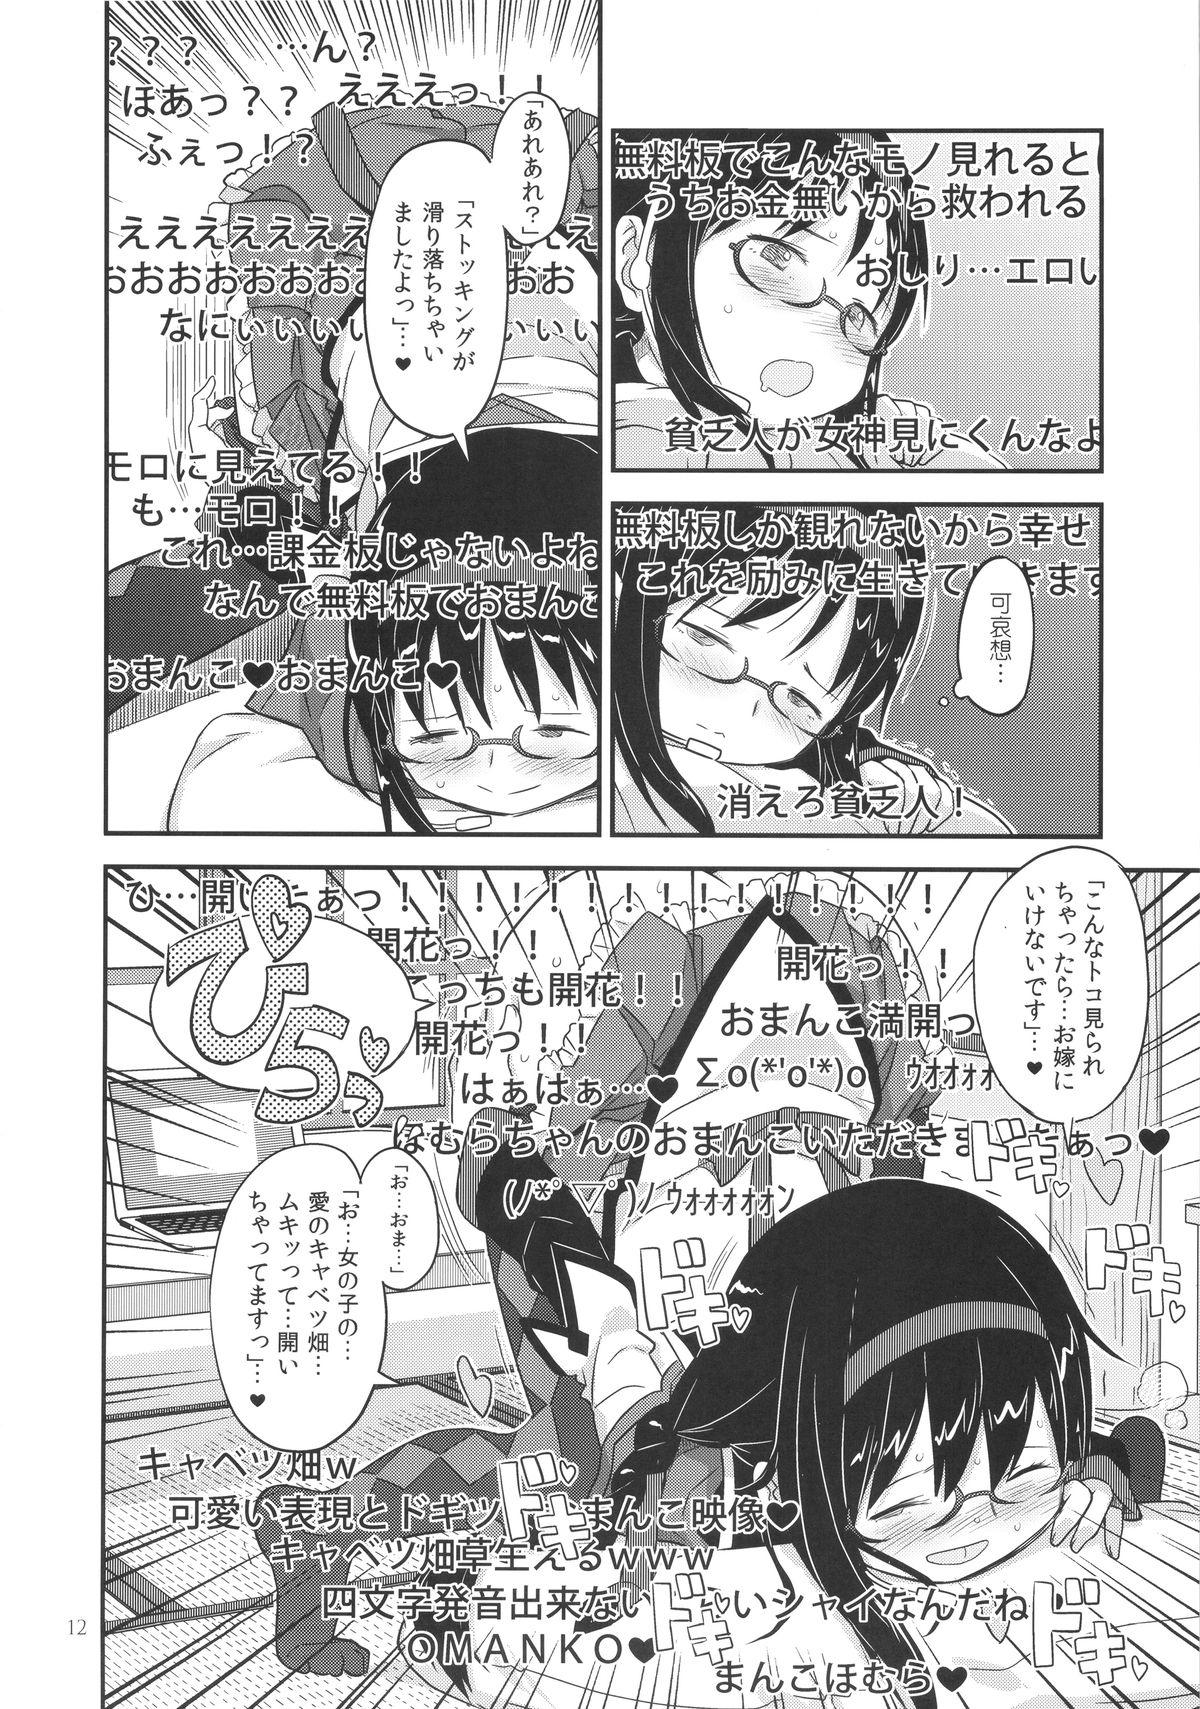 Pounded GIRLIE:EX02 - Puella magi madoka magica Lady - Page 12